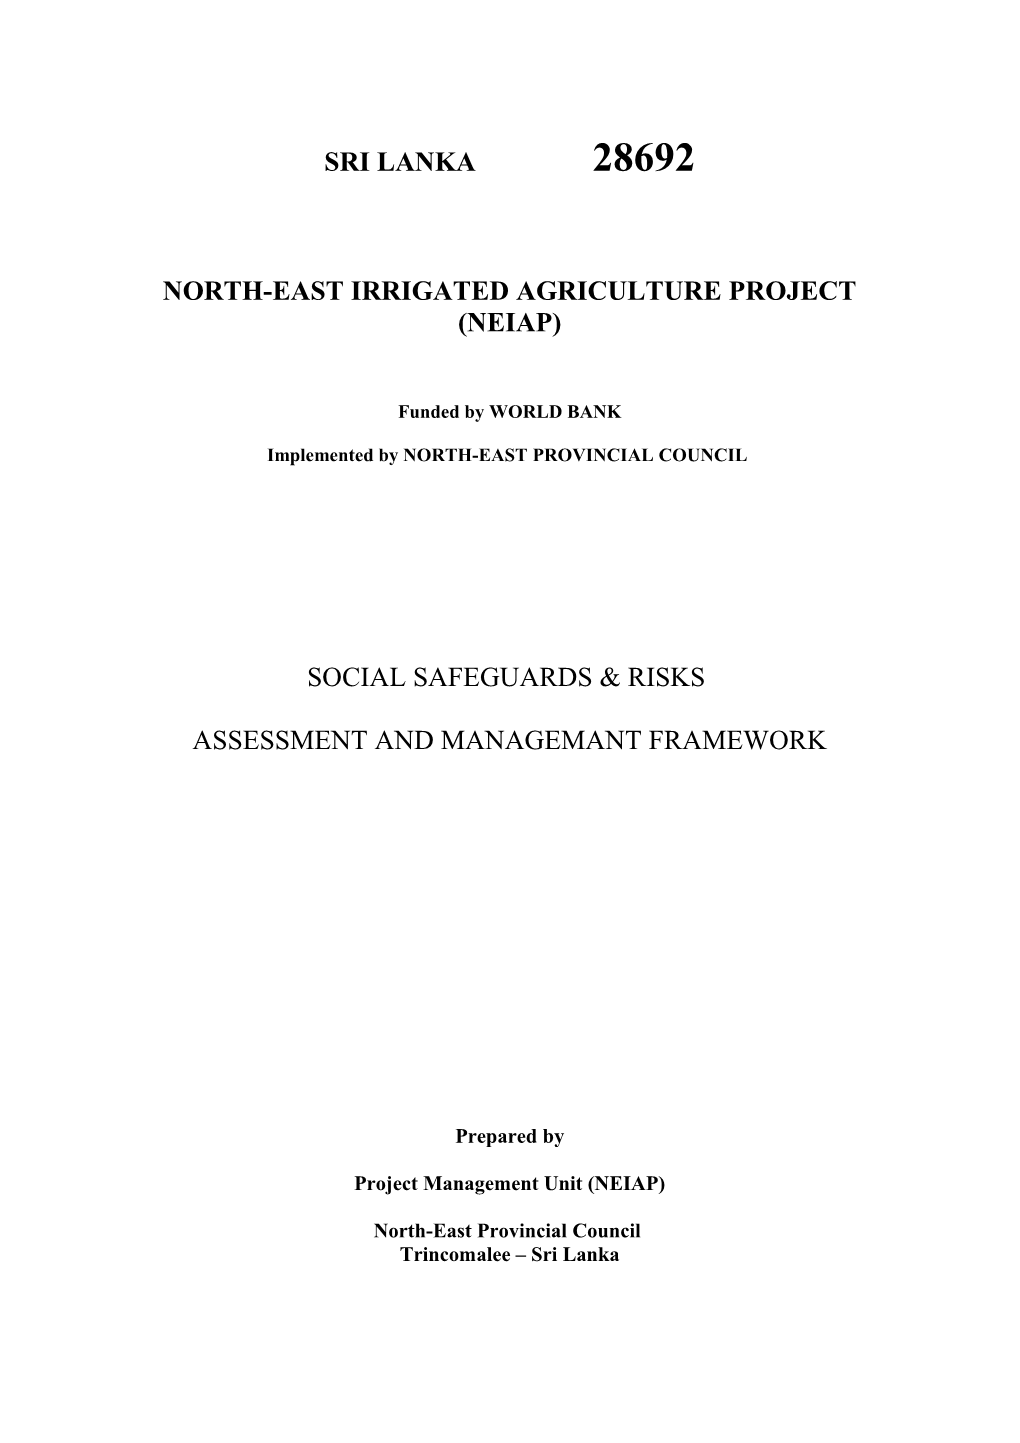 North-East Irrigated Agriculture Project (NEIAP) (Cr 3301 CE)